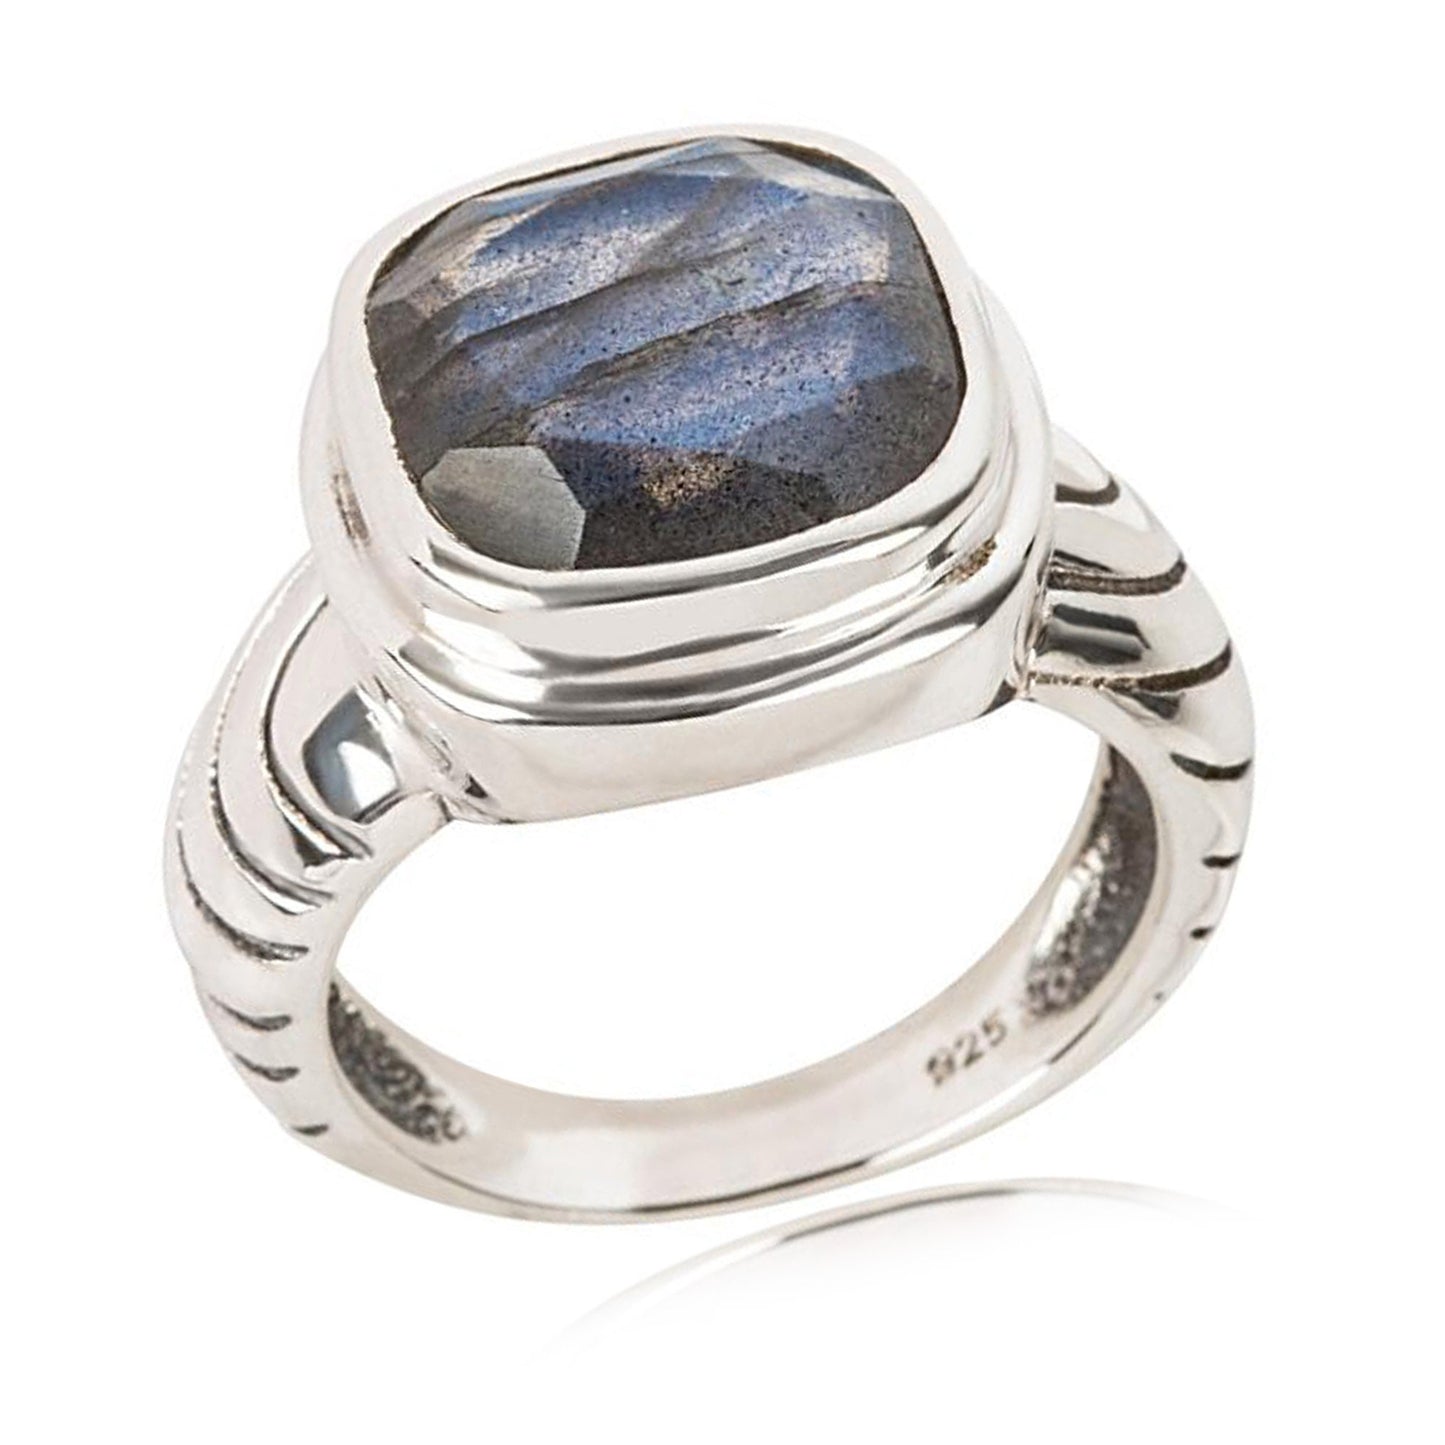 Natural Labradorite Gemstone Ring 925 Sterling Silver Ring Ring For Women Solitaire Ring Fine Jewelry Gift For Her